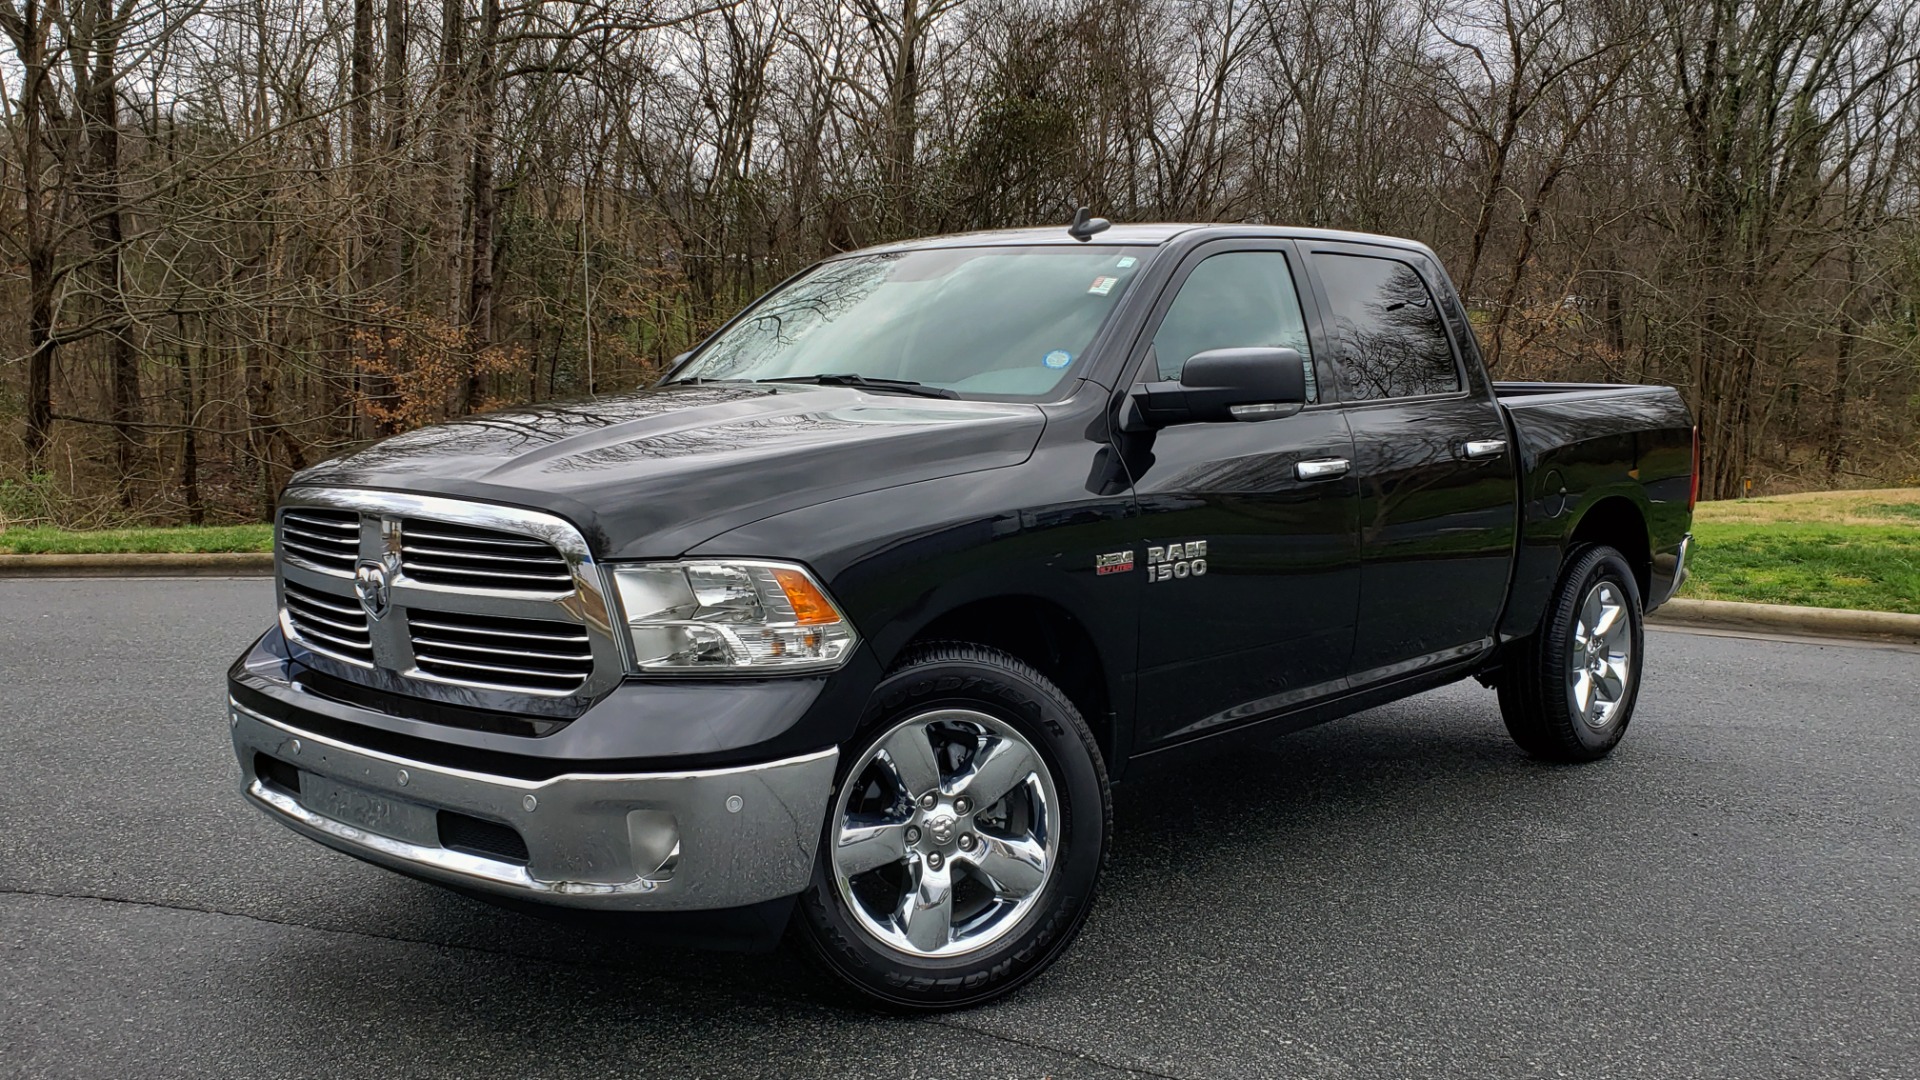 Used 2016 Ram 1500 BIG HORN 5.7L HEMI CREW CAB / HTD STS / NAV / REAVIEW for sale Sold at Formula Imports in Charlotte NC 28227 1